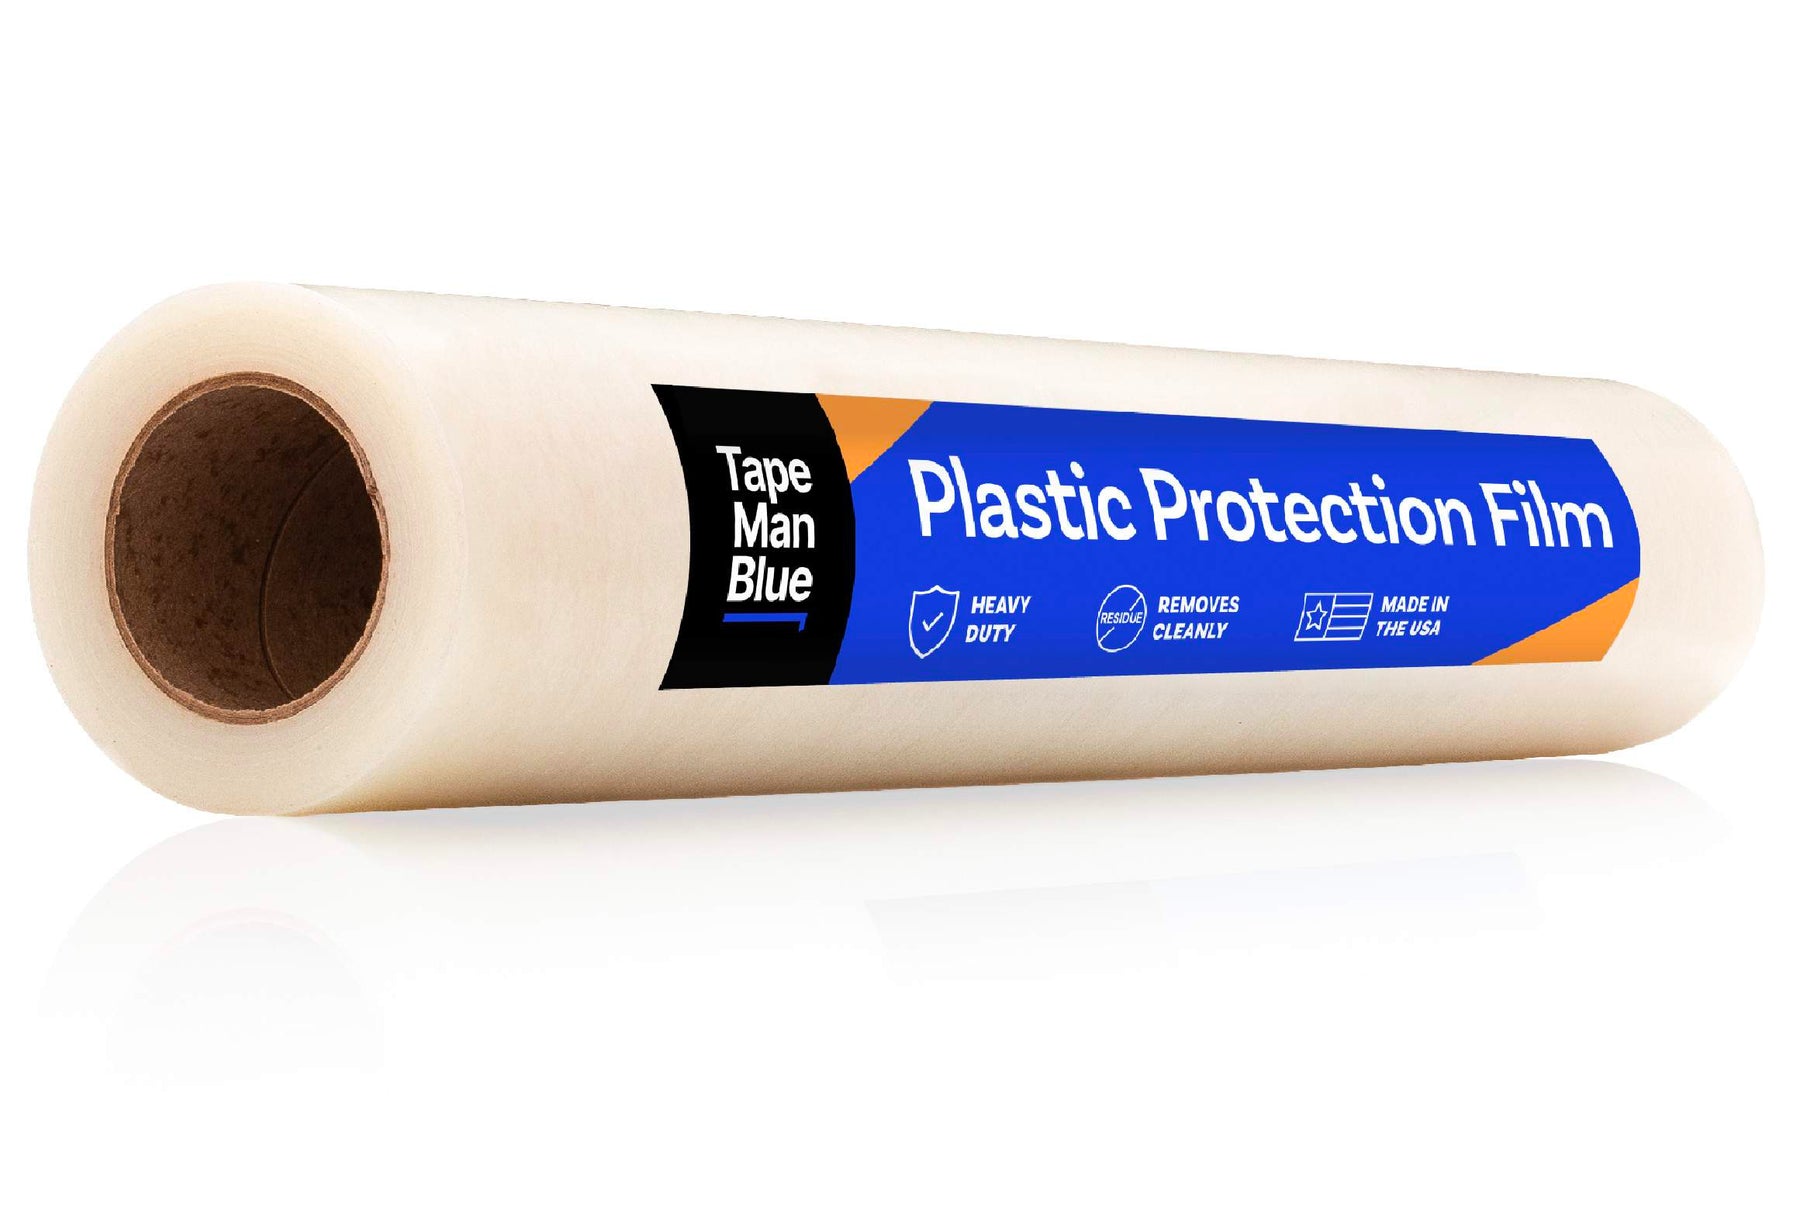 Protective Film for Plastic Surfaces, Made in USA